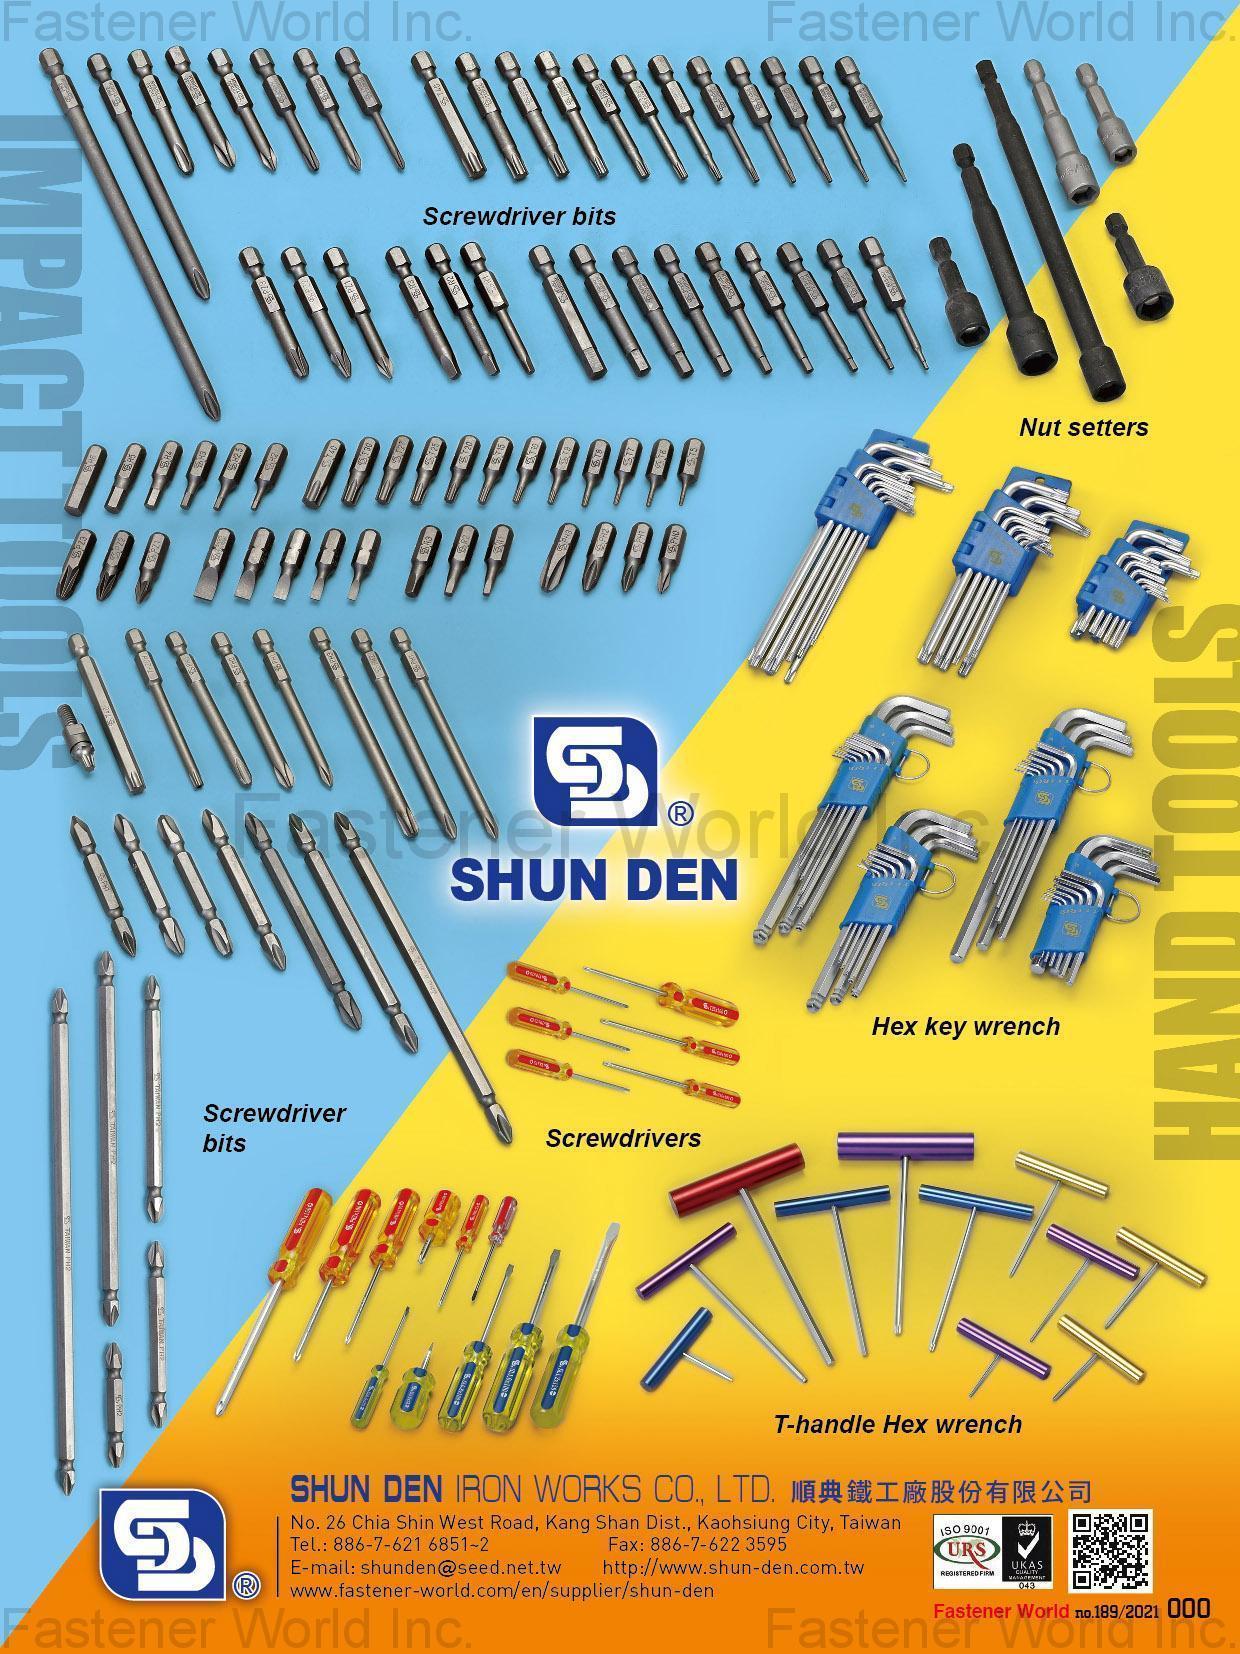 Screwdriver Bits,Screwdrivers,Nut Setters,Hex-key Wrenches